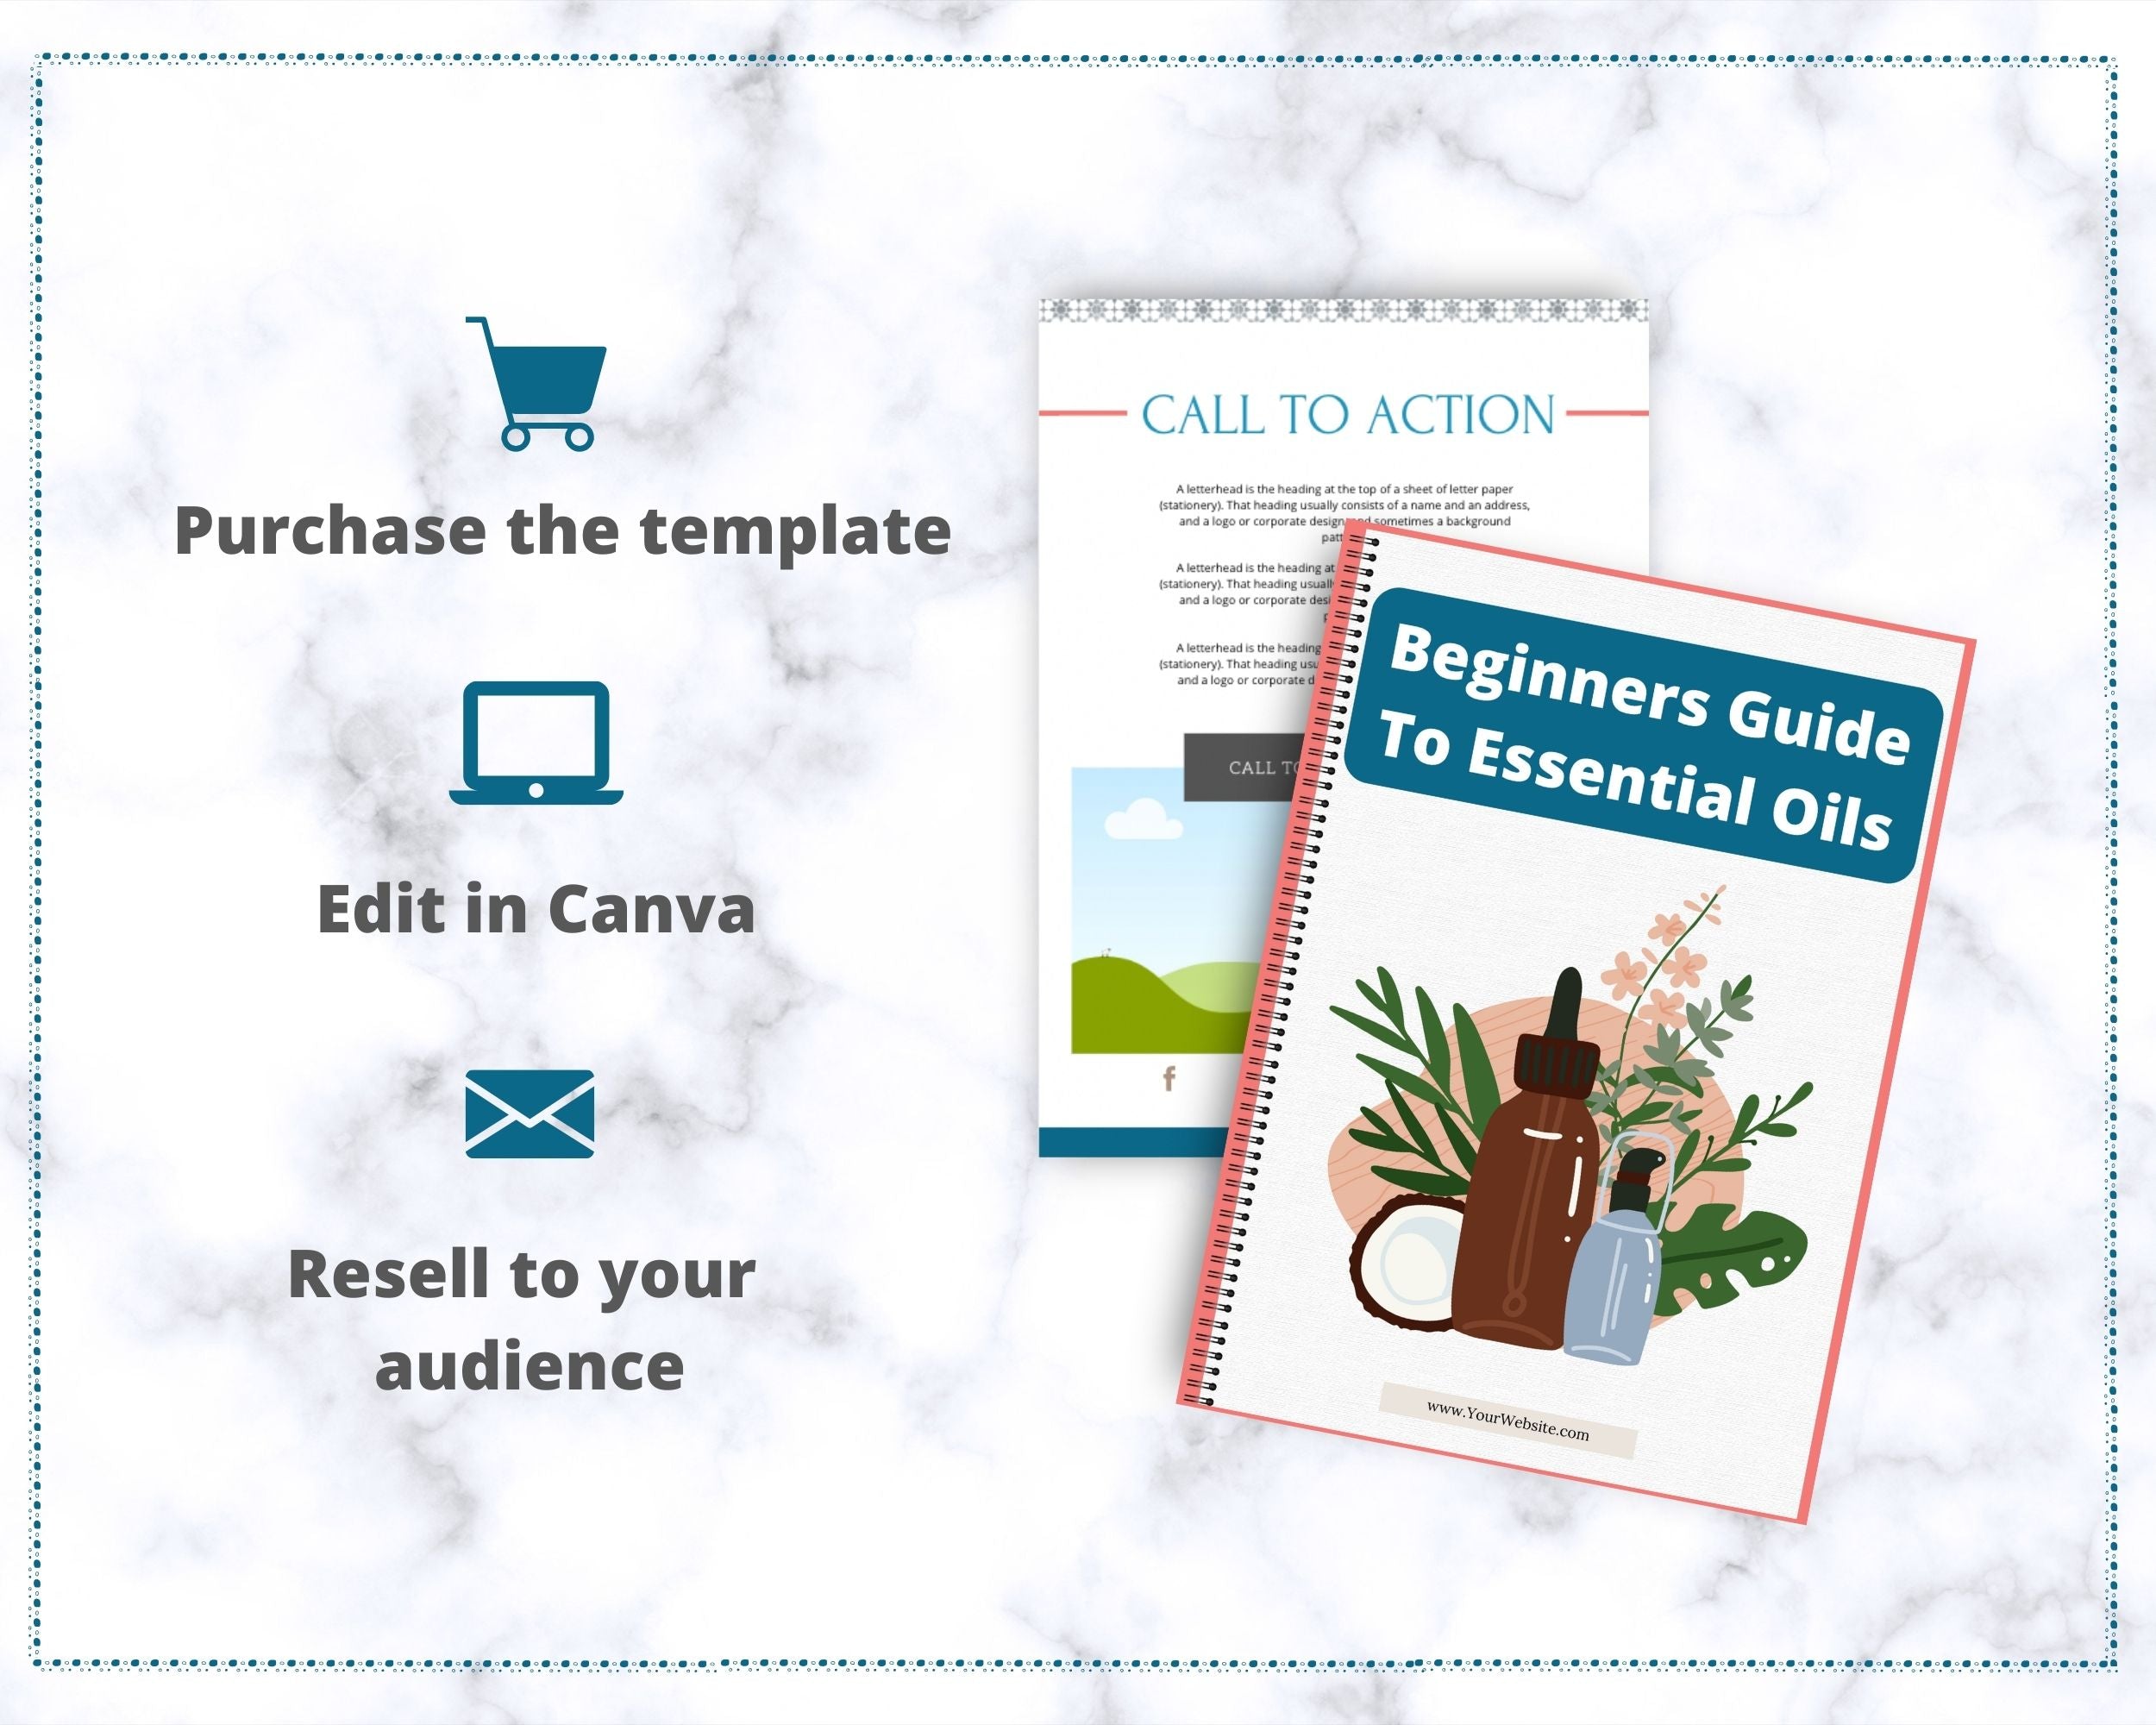 Editable Beginners Guide To Essential Oils Ebook | Done-for-You Ebook in Canva | Rebrandable and Resizable Canva Template